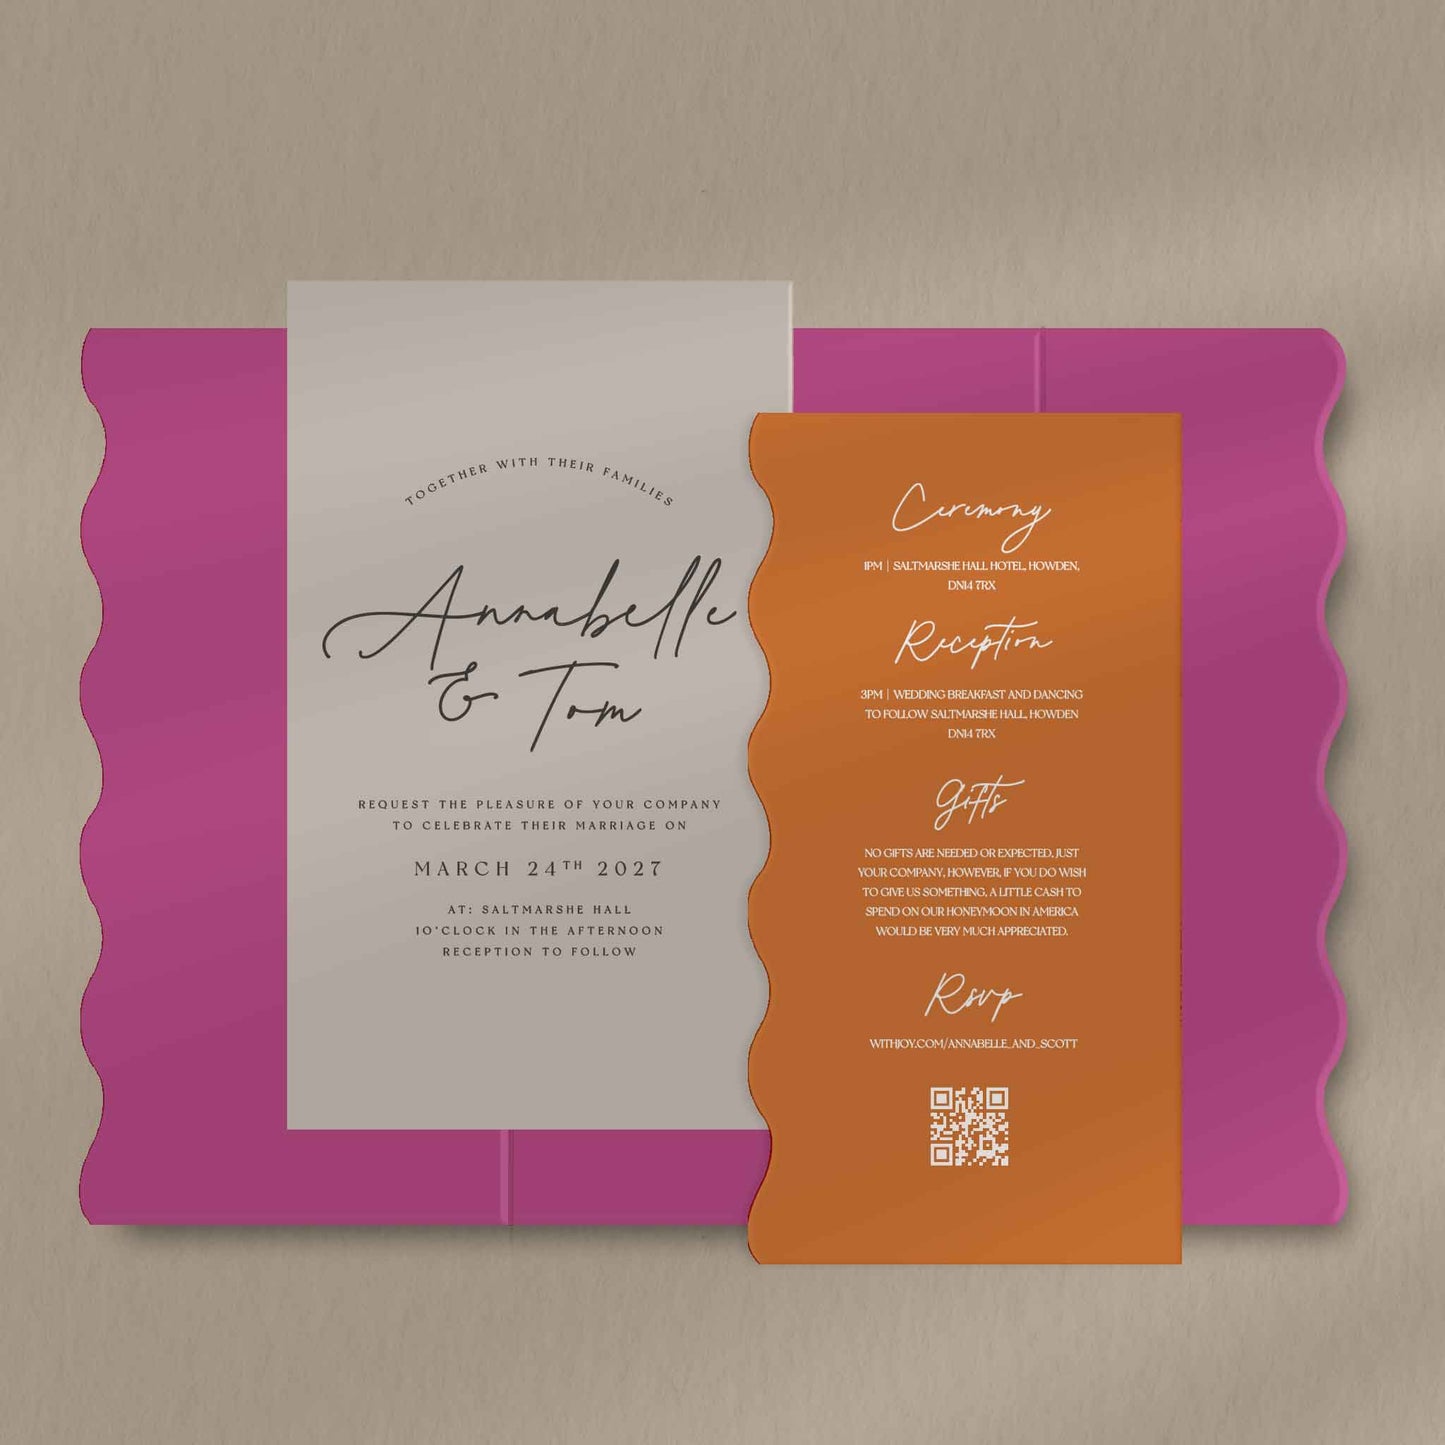 Scallop Envelope Sample  Ivy and Gold Wedding Stationery Annabelle  